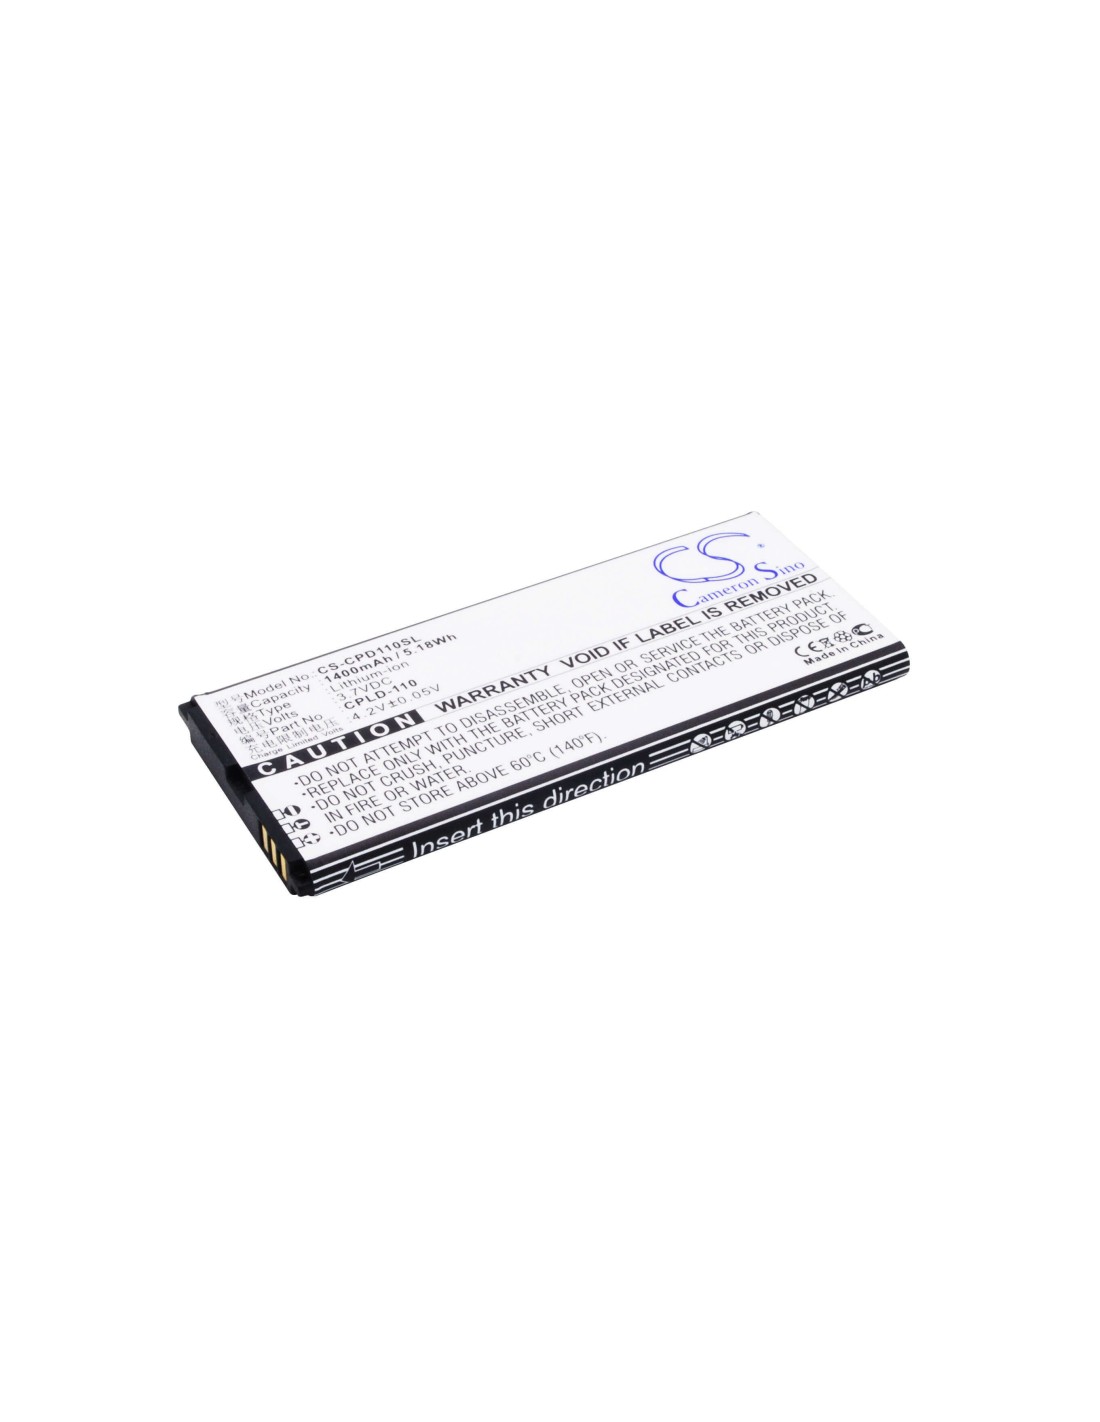 Battery for Coolpad 8076D, 5217, 8076 3.7V, 1400mAh - 5.18Wh